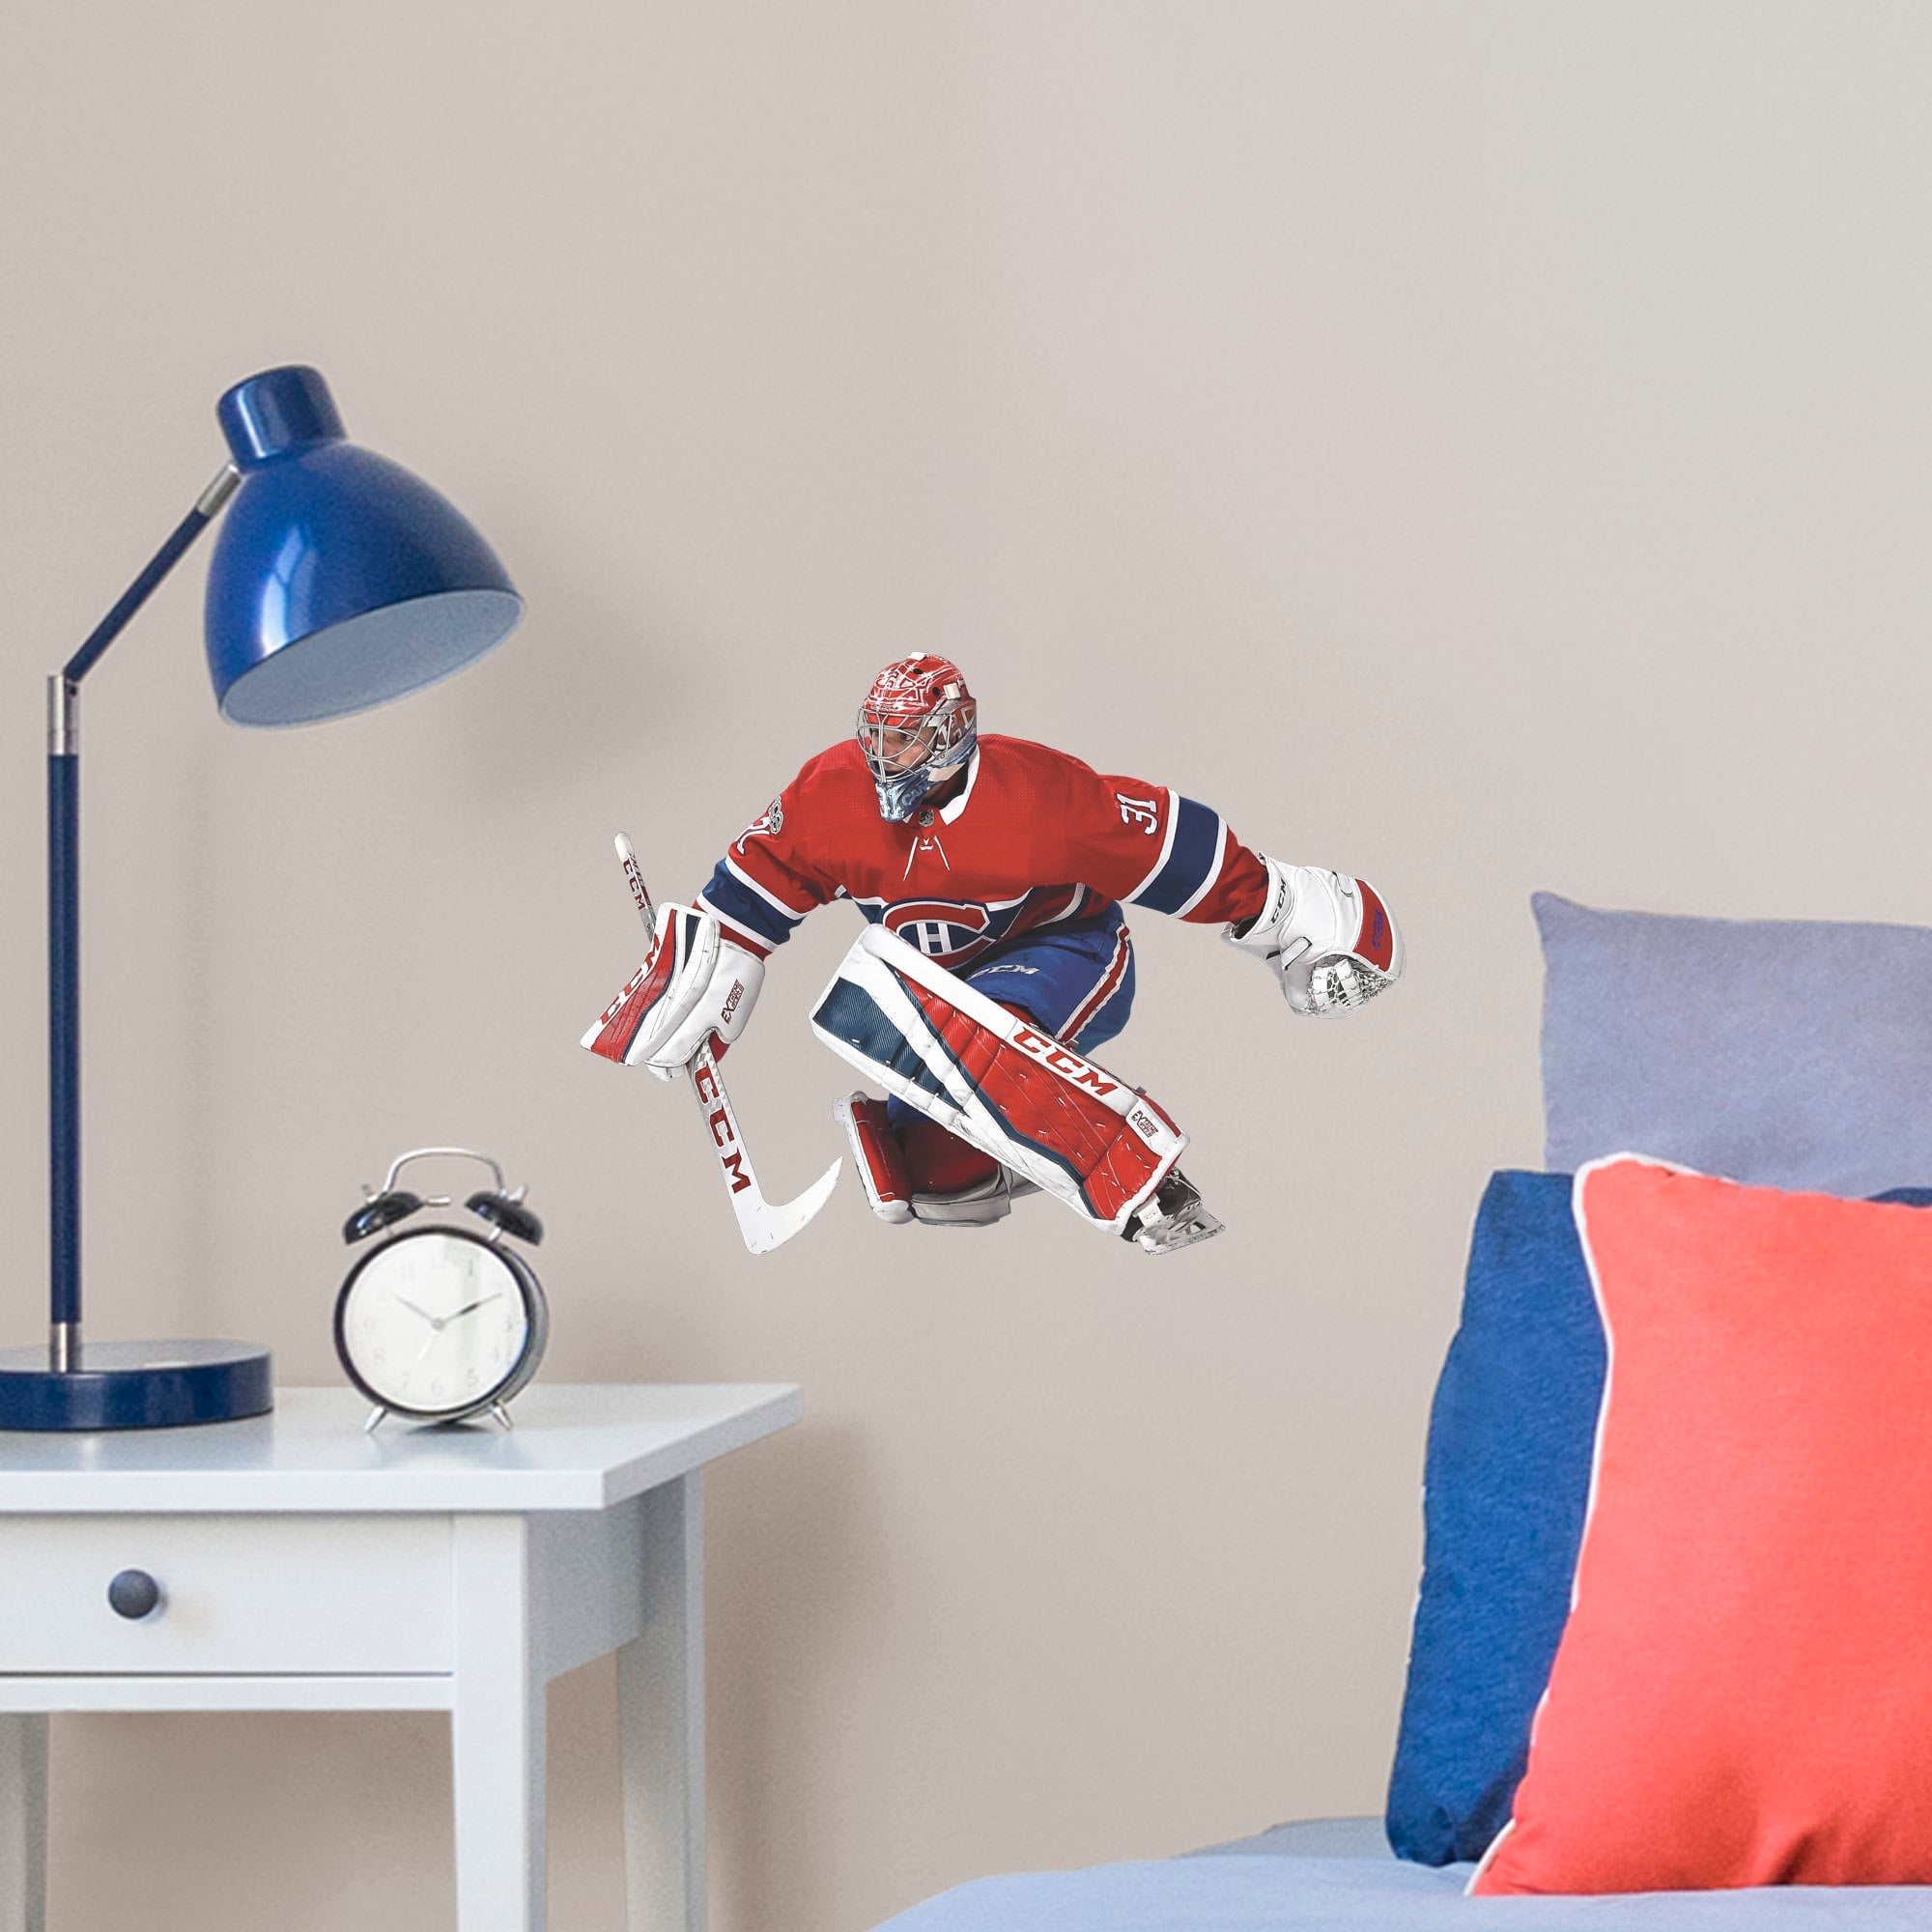 Carey Price for Montreal Canadiens - Officially Licensed NHL Removable Wall Decal Large by Fathead | Vinyl